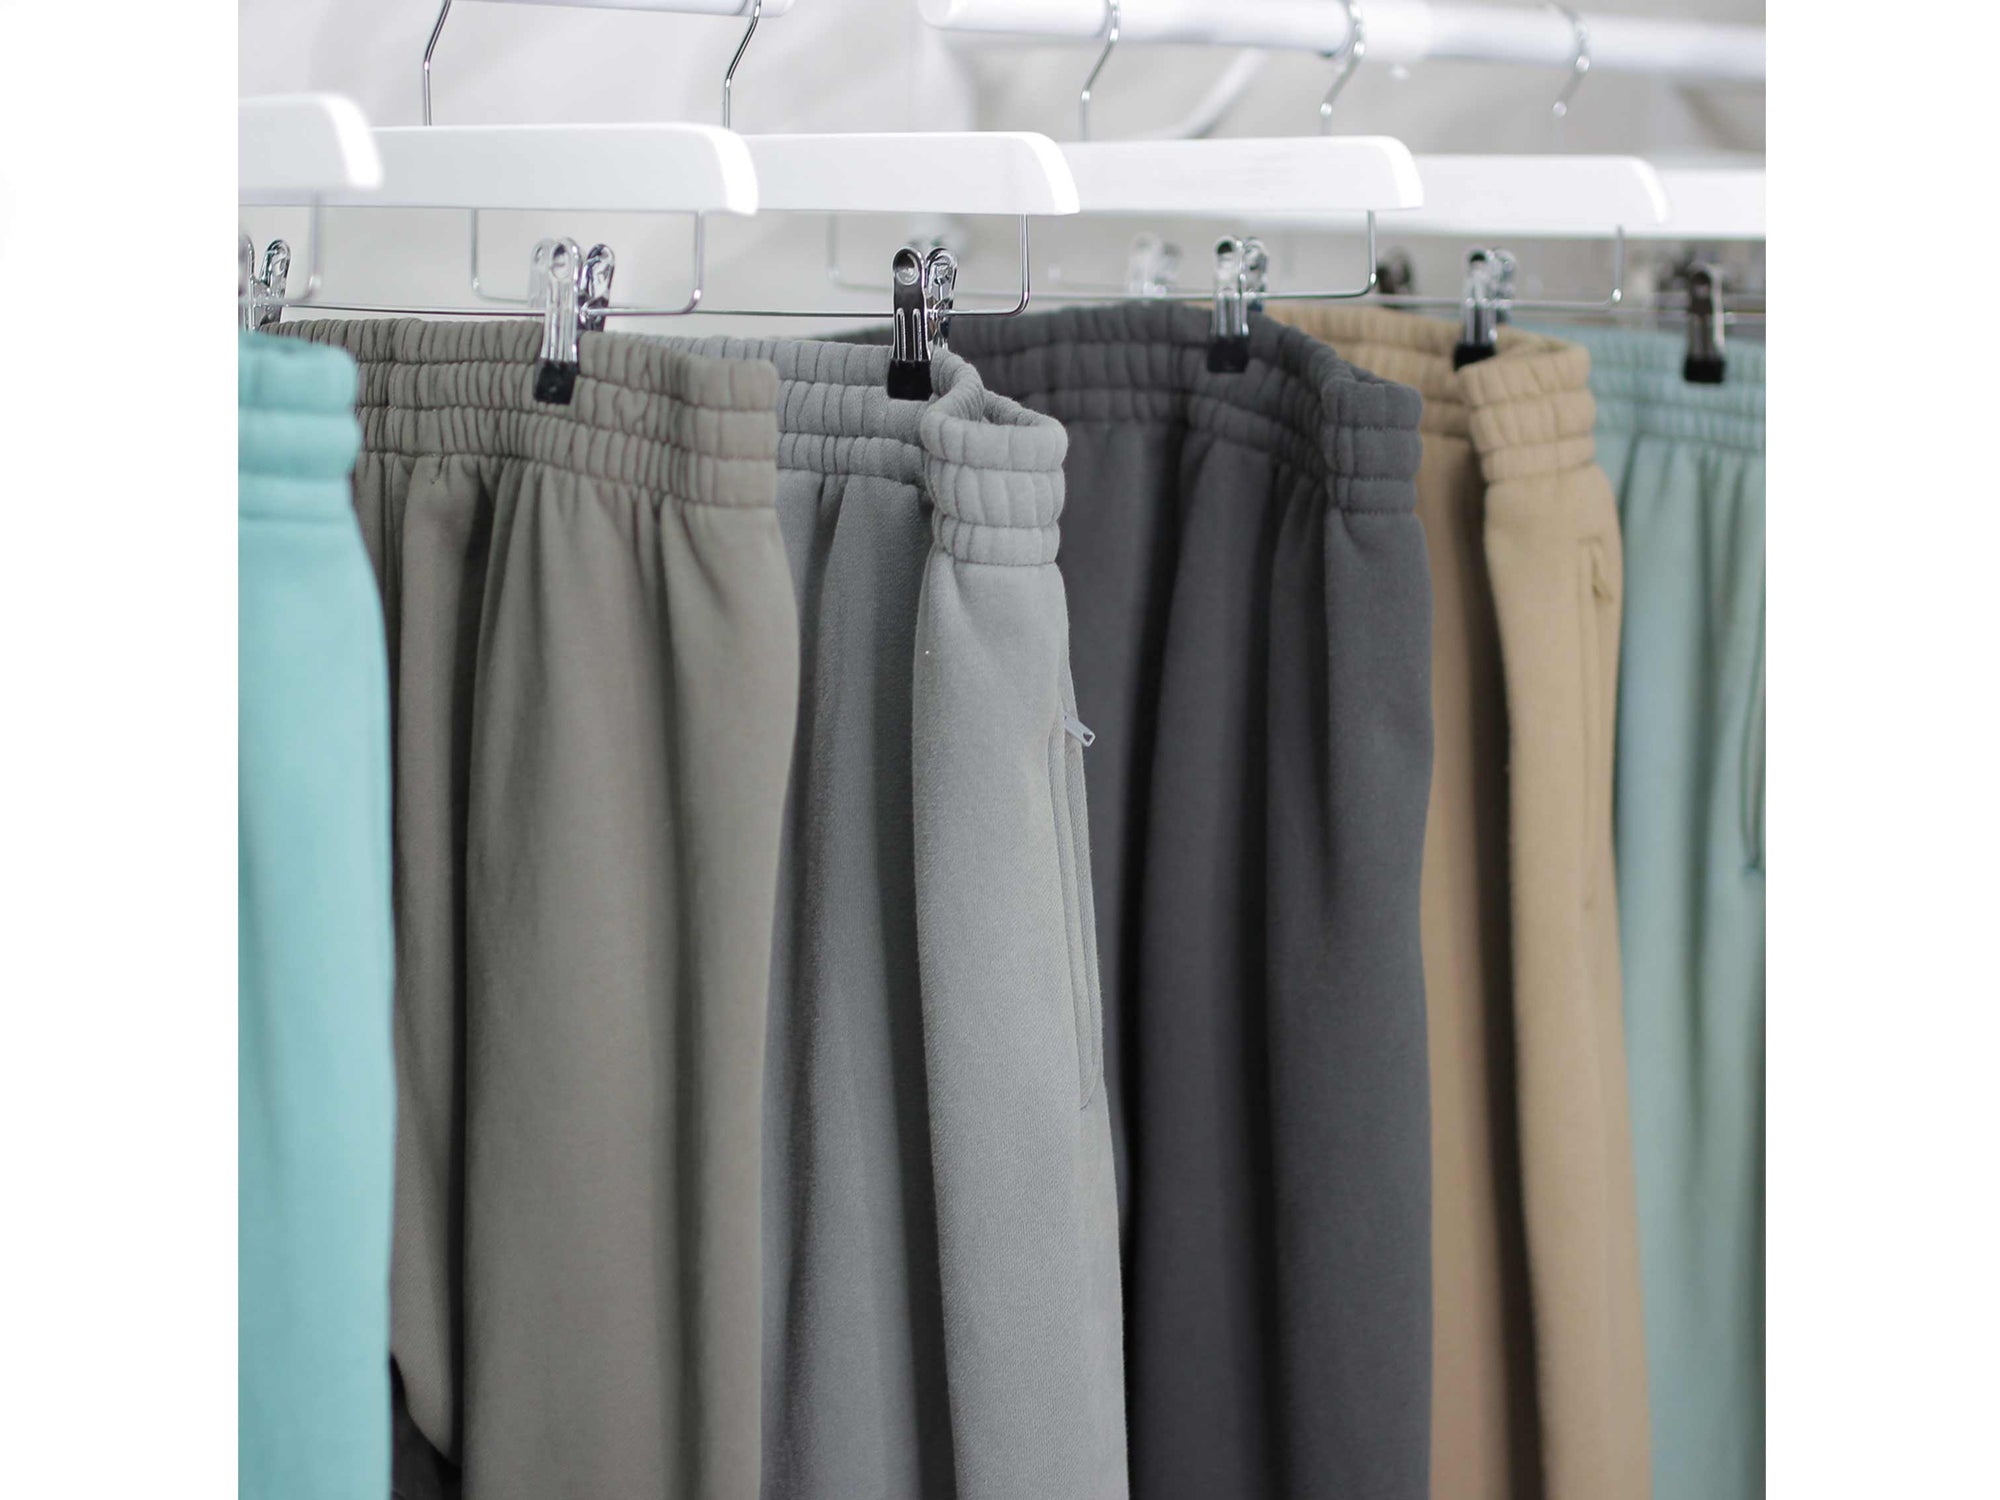 Searching for the Ideal Pair of Jogging Pants: A Manual for Discovering Your Ideal Fit